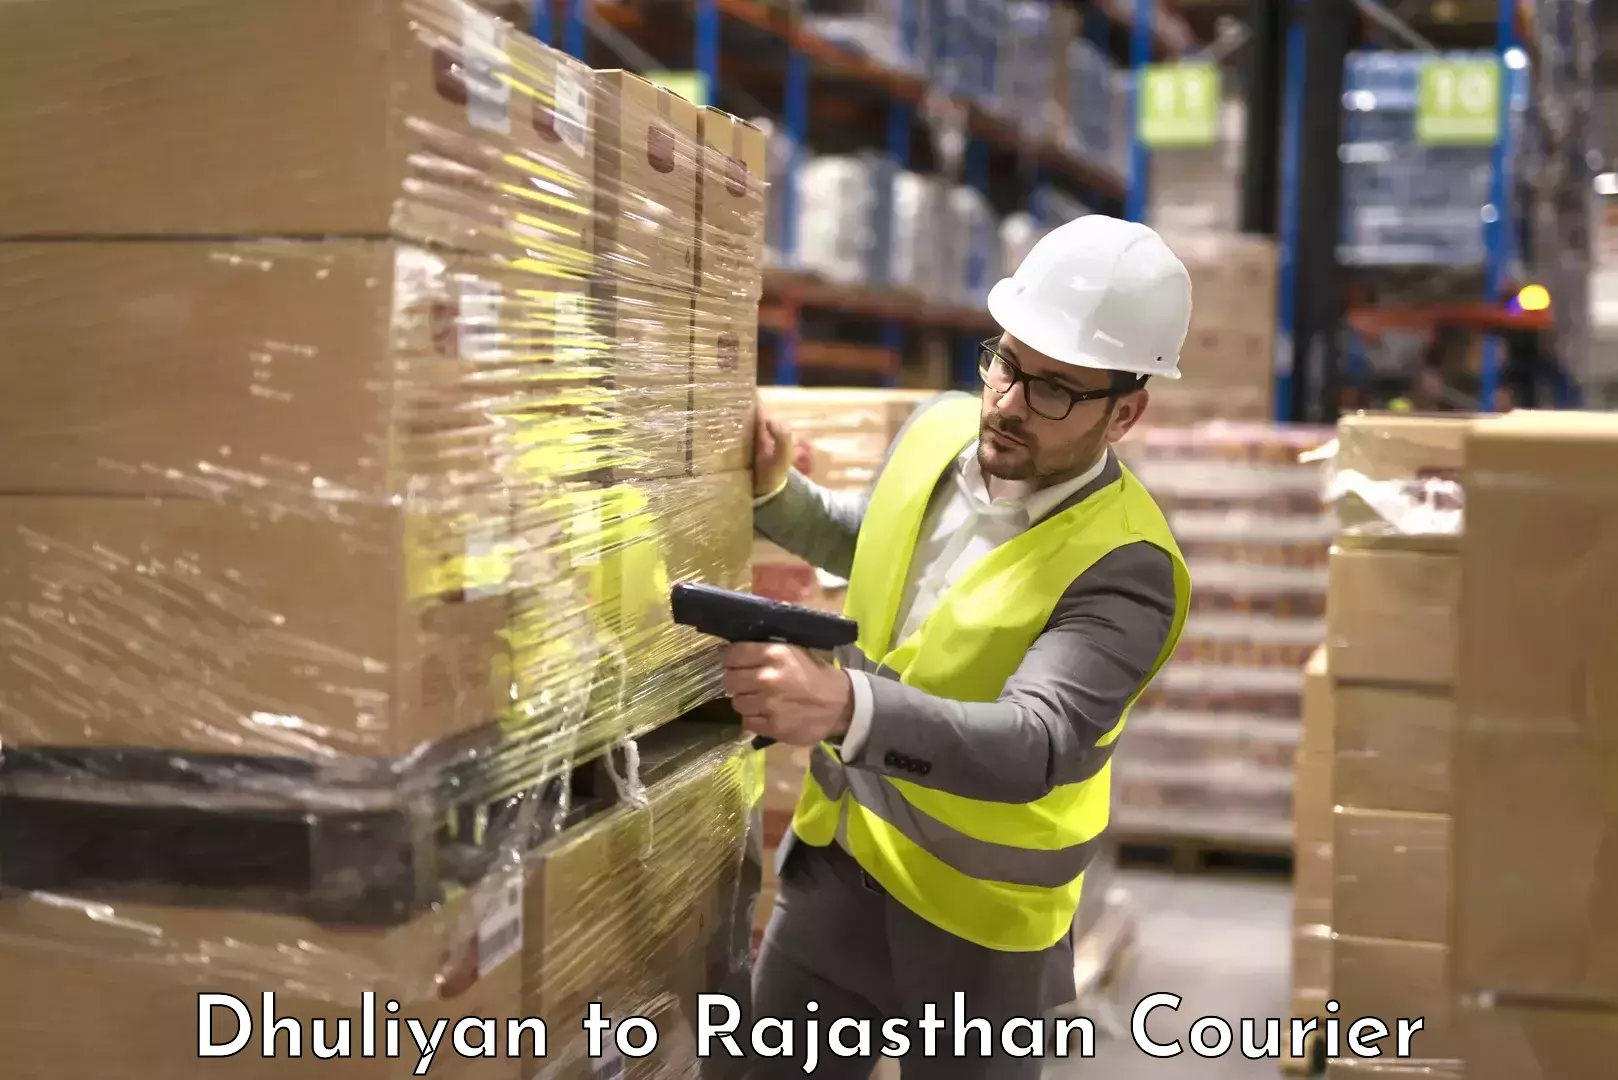 Luggage shipment specialists Dhuliyan to Rajasthan